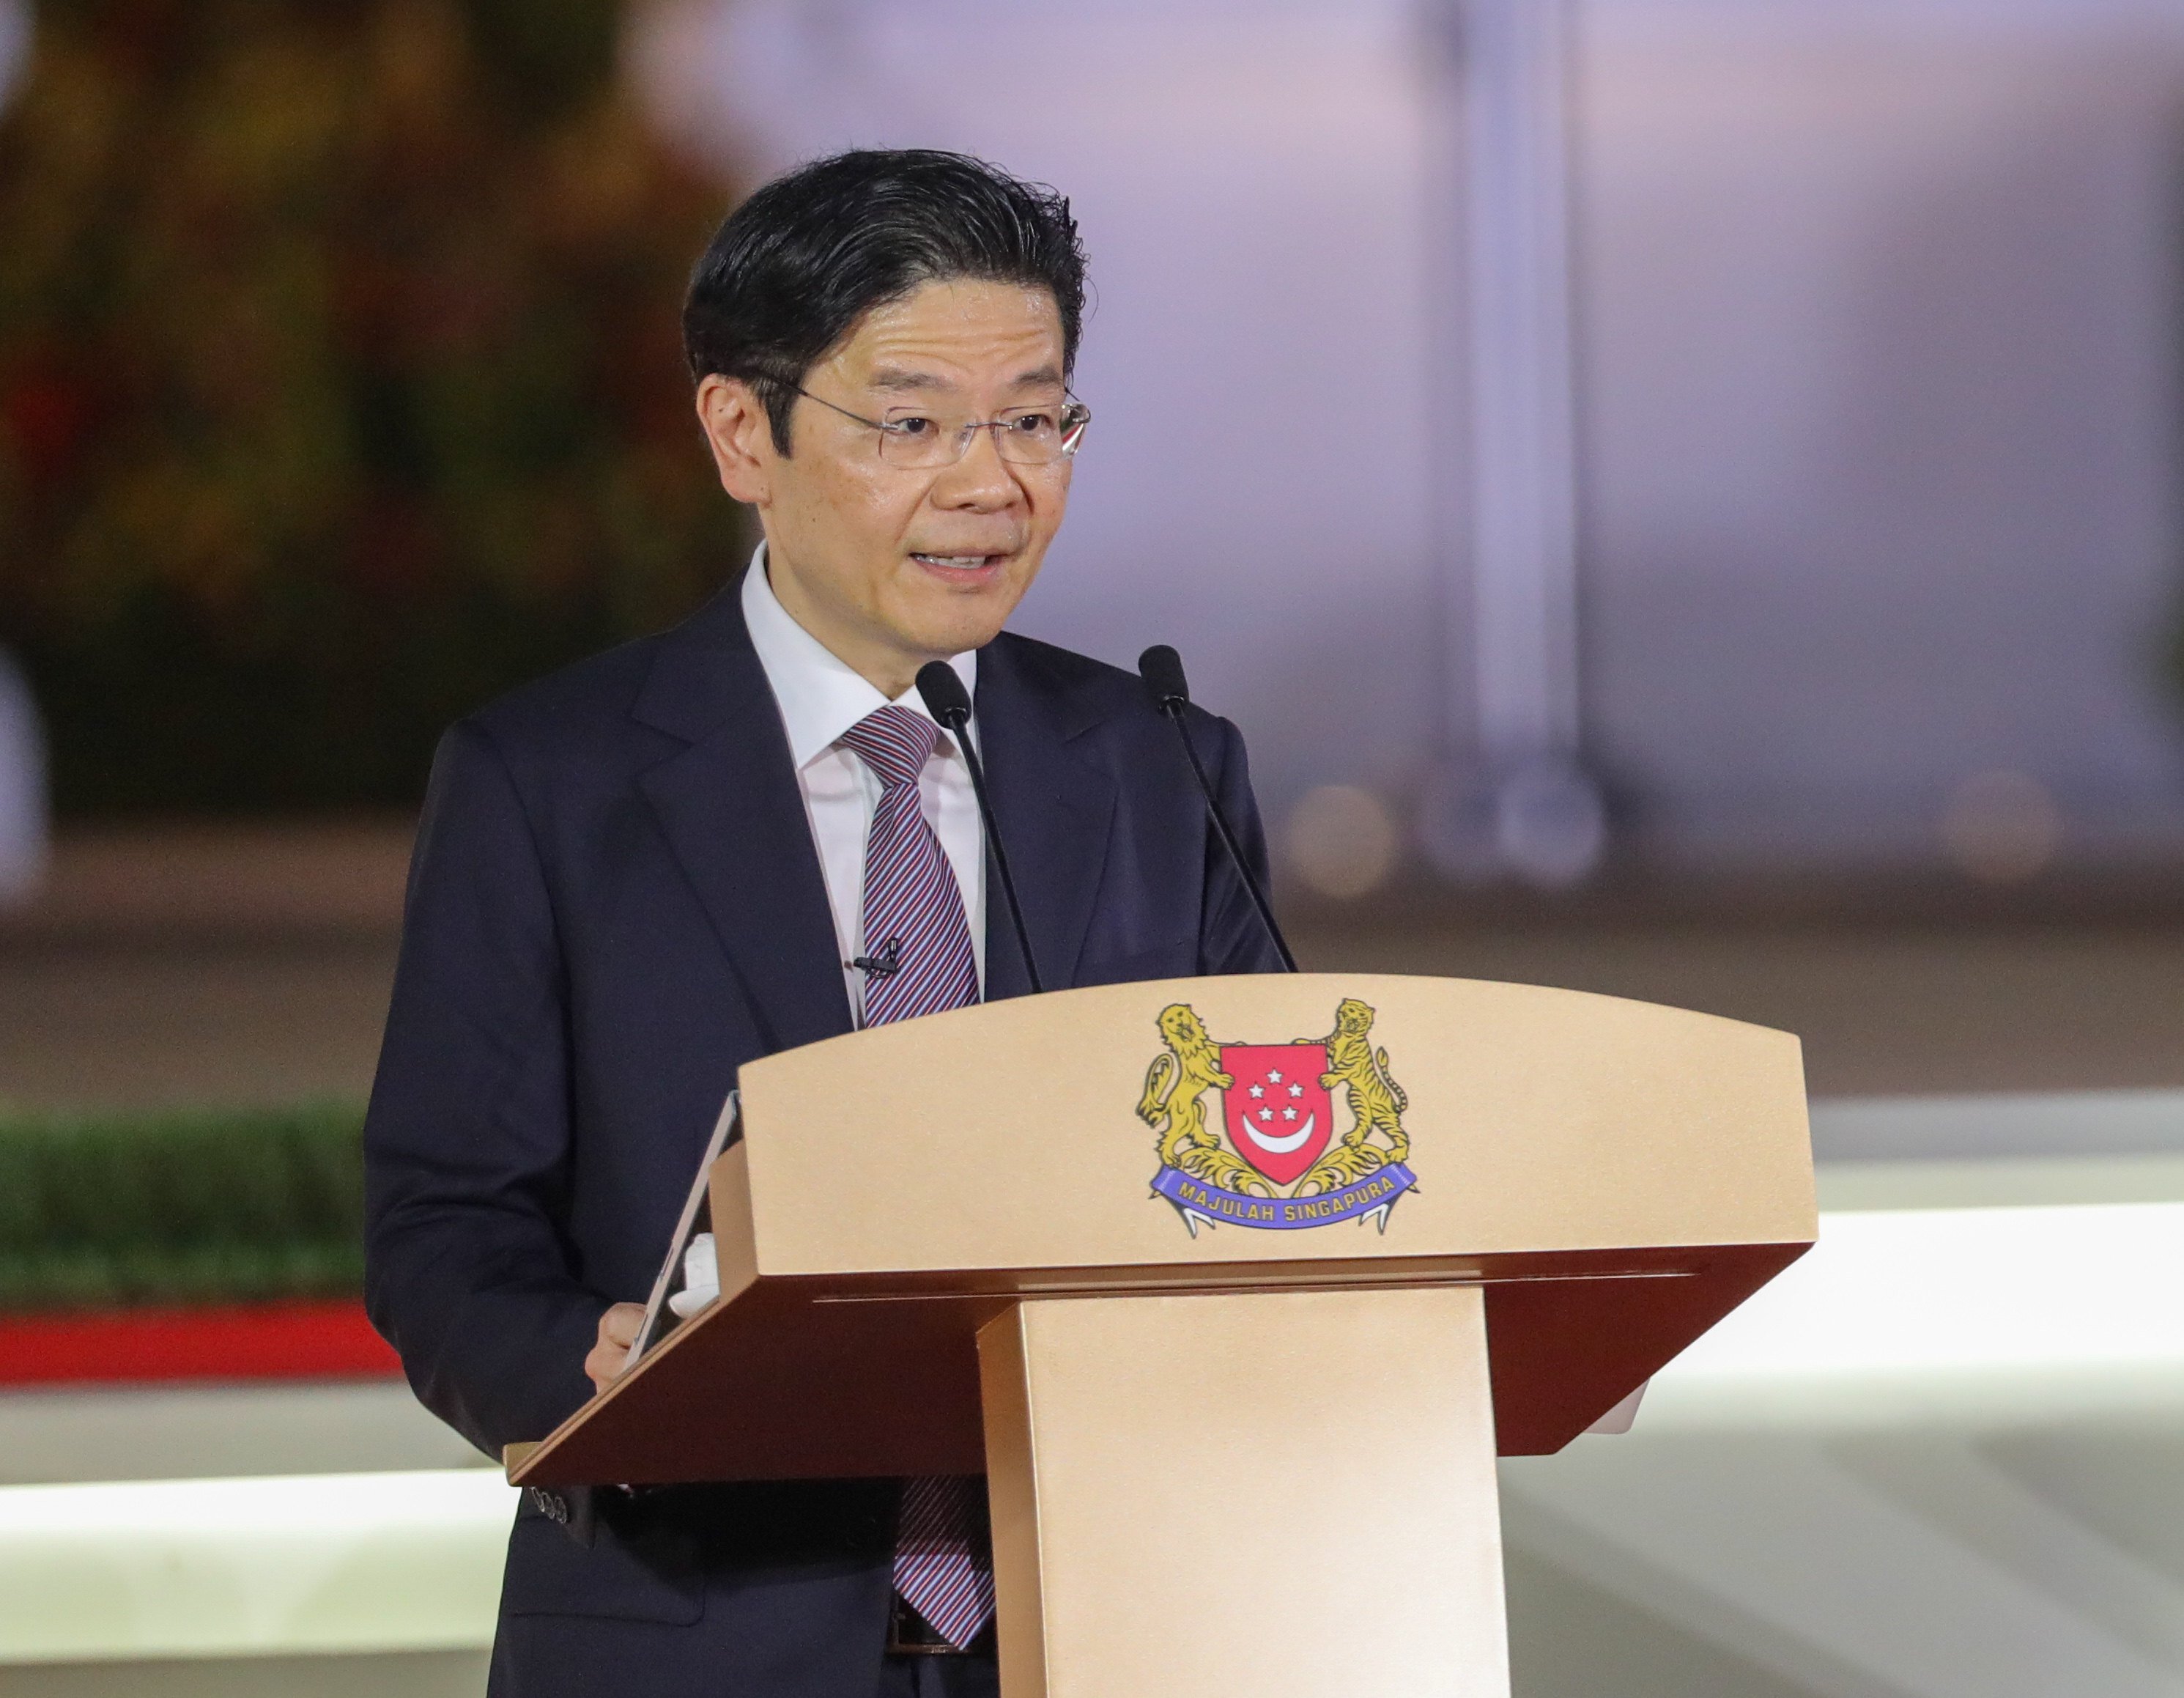 Singapore’s new Prime Minister Lawrence Wong speaks during a swearing-in ceremony held at Istana on Wednesday. Photo: Ministry of Communications and Information of Singapore/Handout via Xinhua